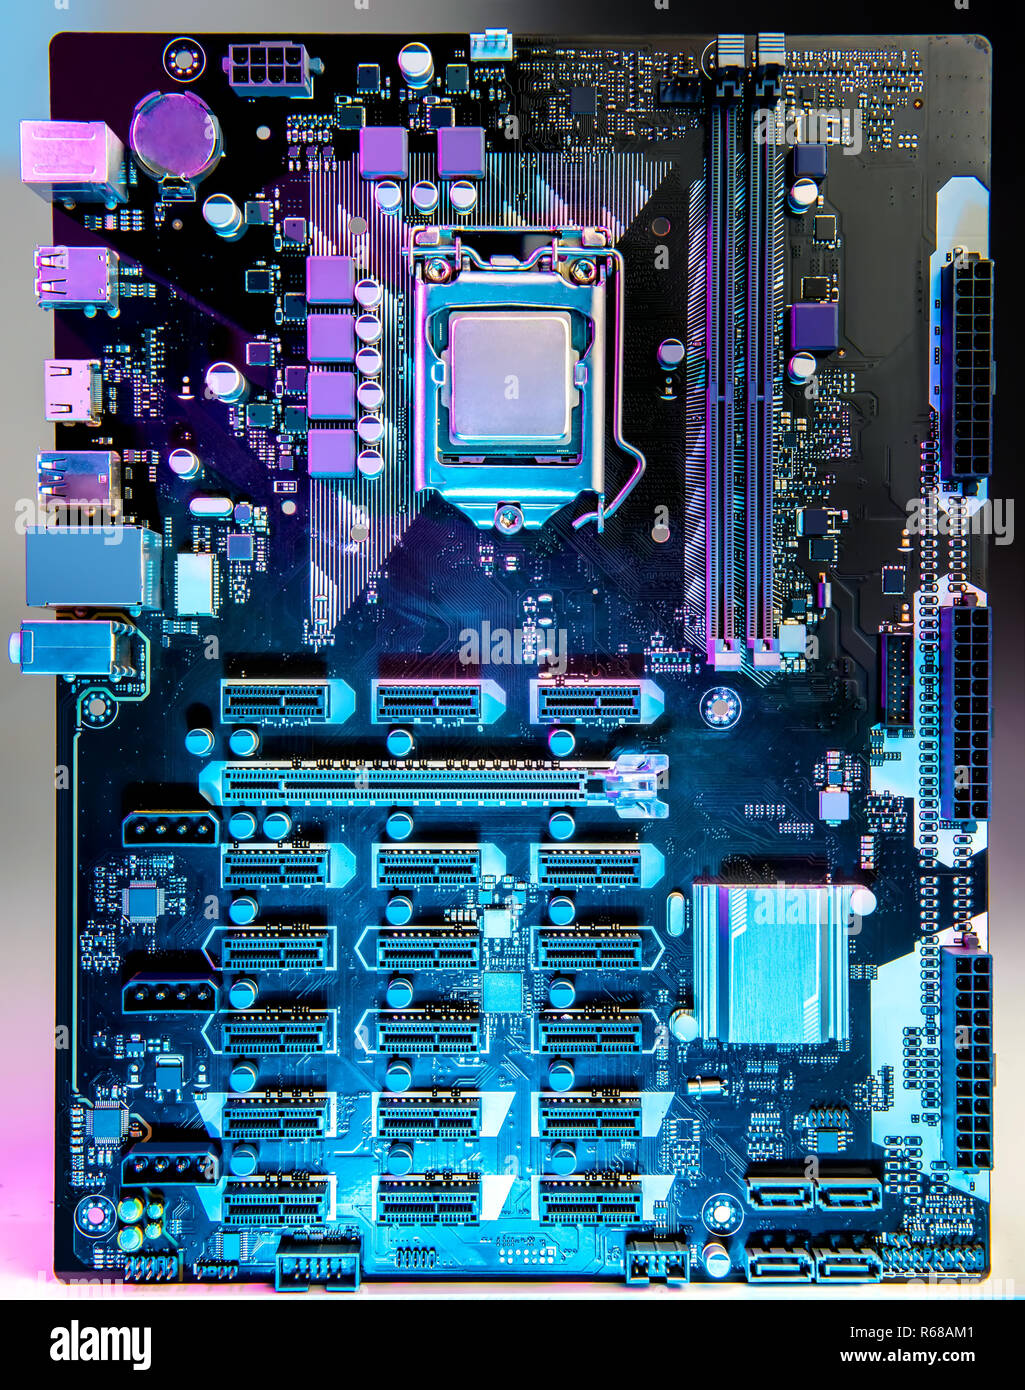 Computer motherboard on the table. View from above Stock Photo